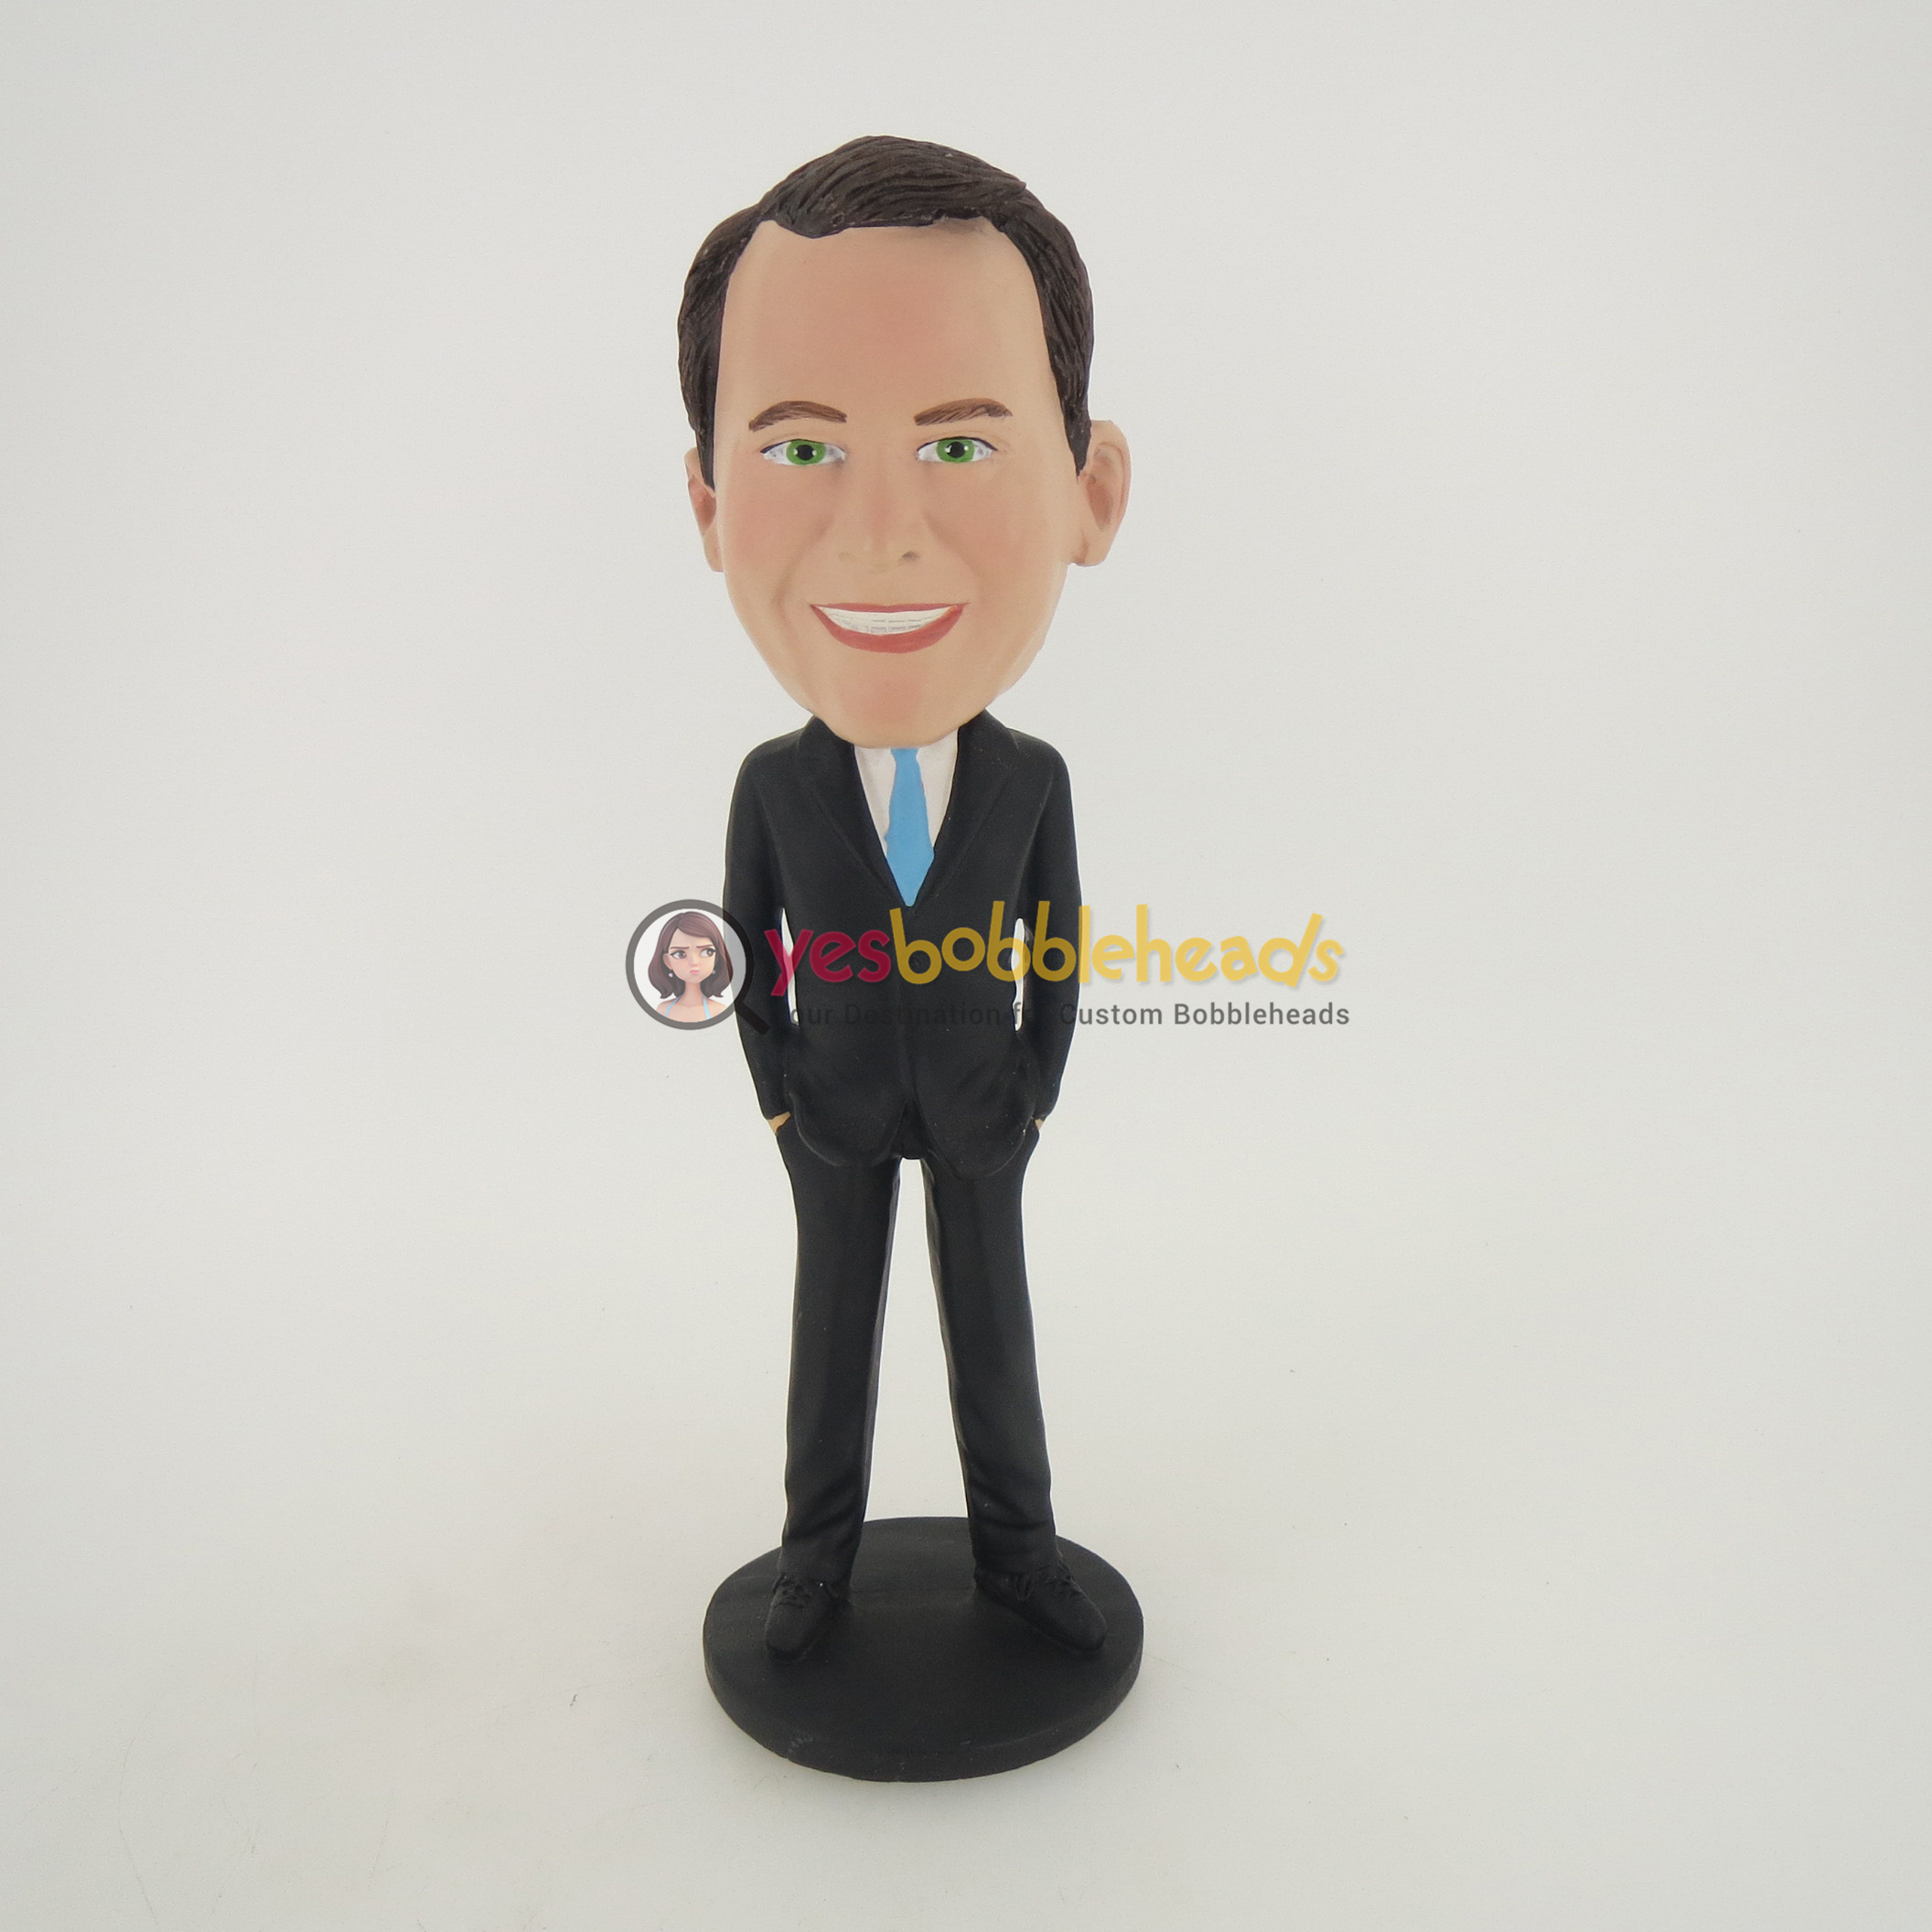 Picture of Custom Bobblehead Doll: Man In Black Suit And Blue Tie